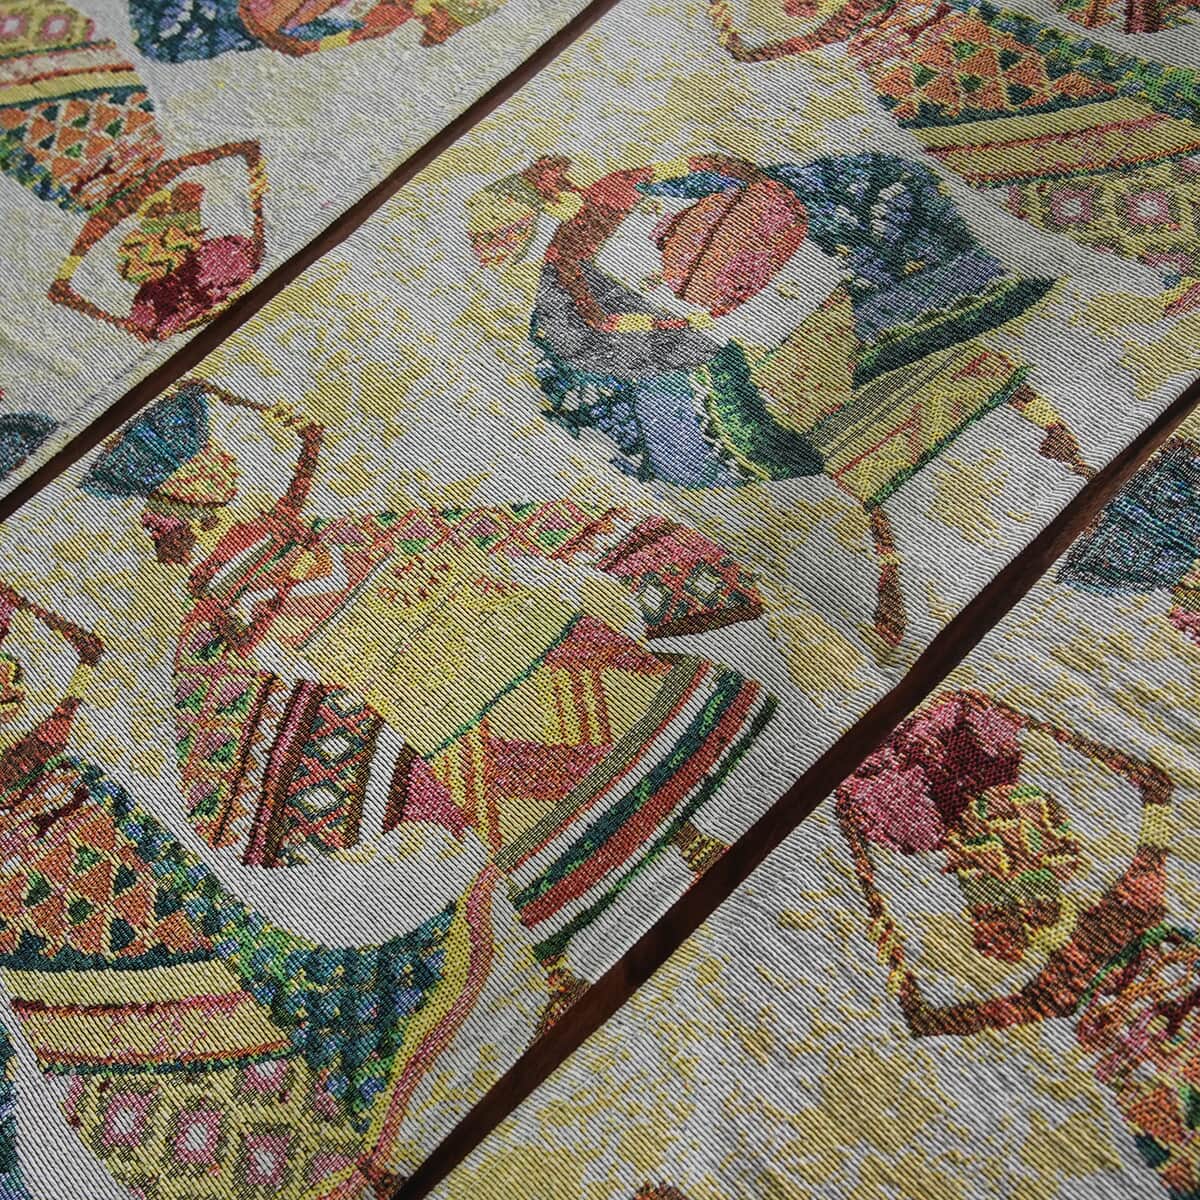 Set of 5 Multi Color Ancient Tribal Printed Jacquard Placemats and Table Runner image number 2